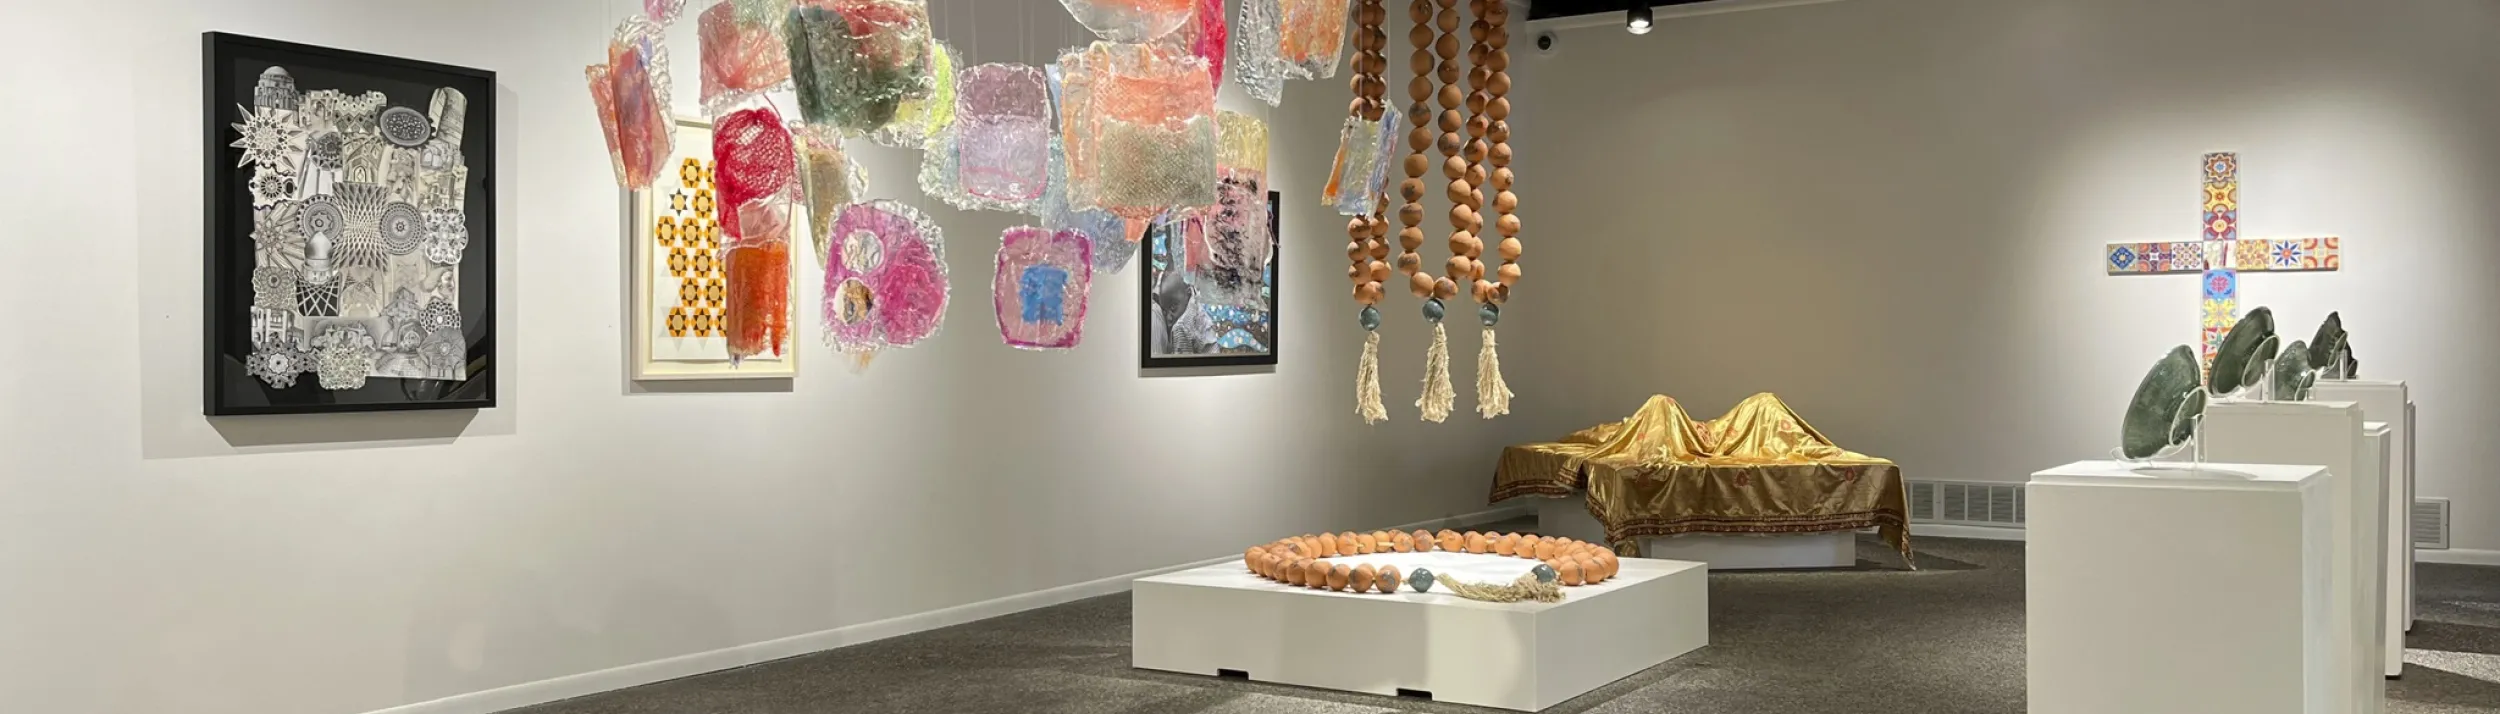 A colorful gallery exhibit full of hanging glasswork and pottery on stands.